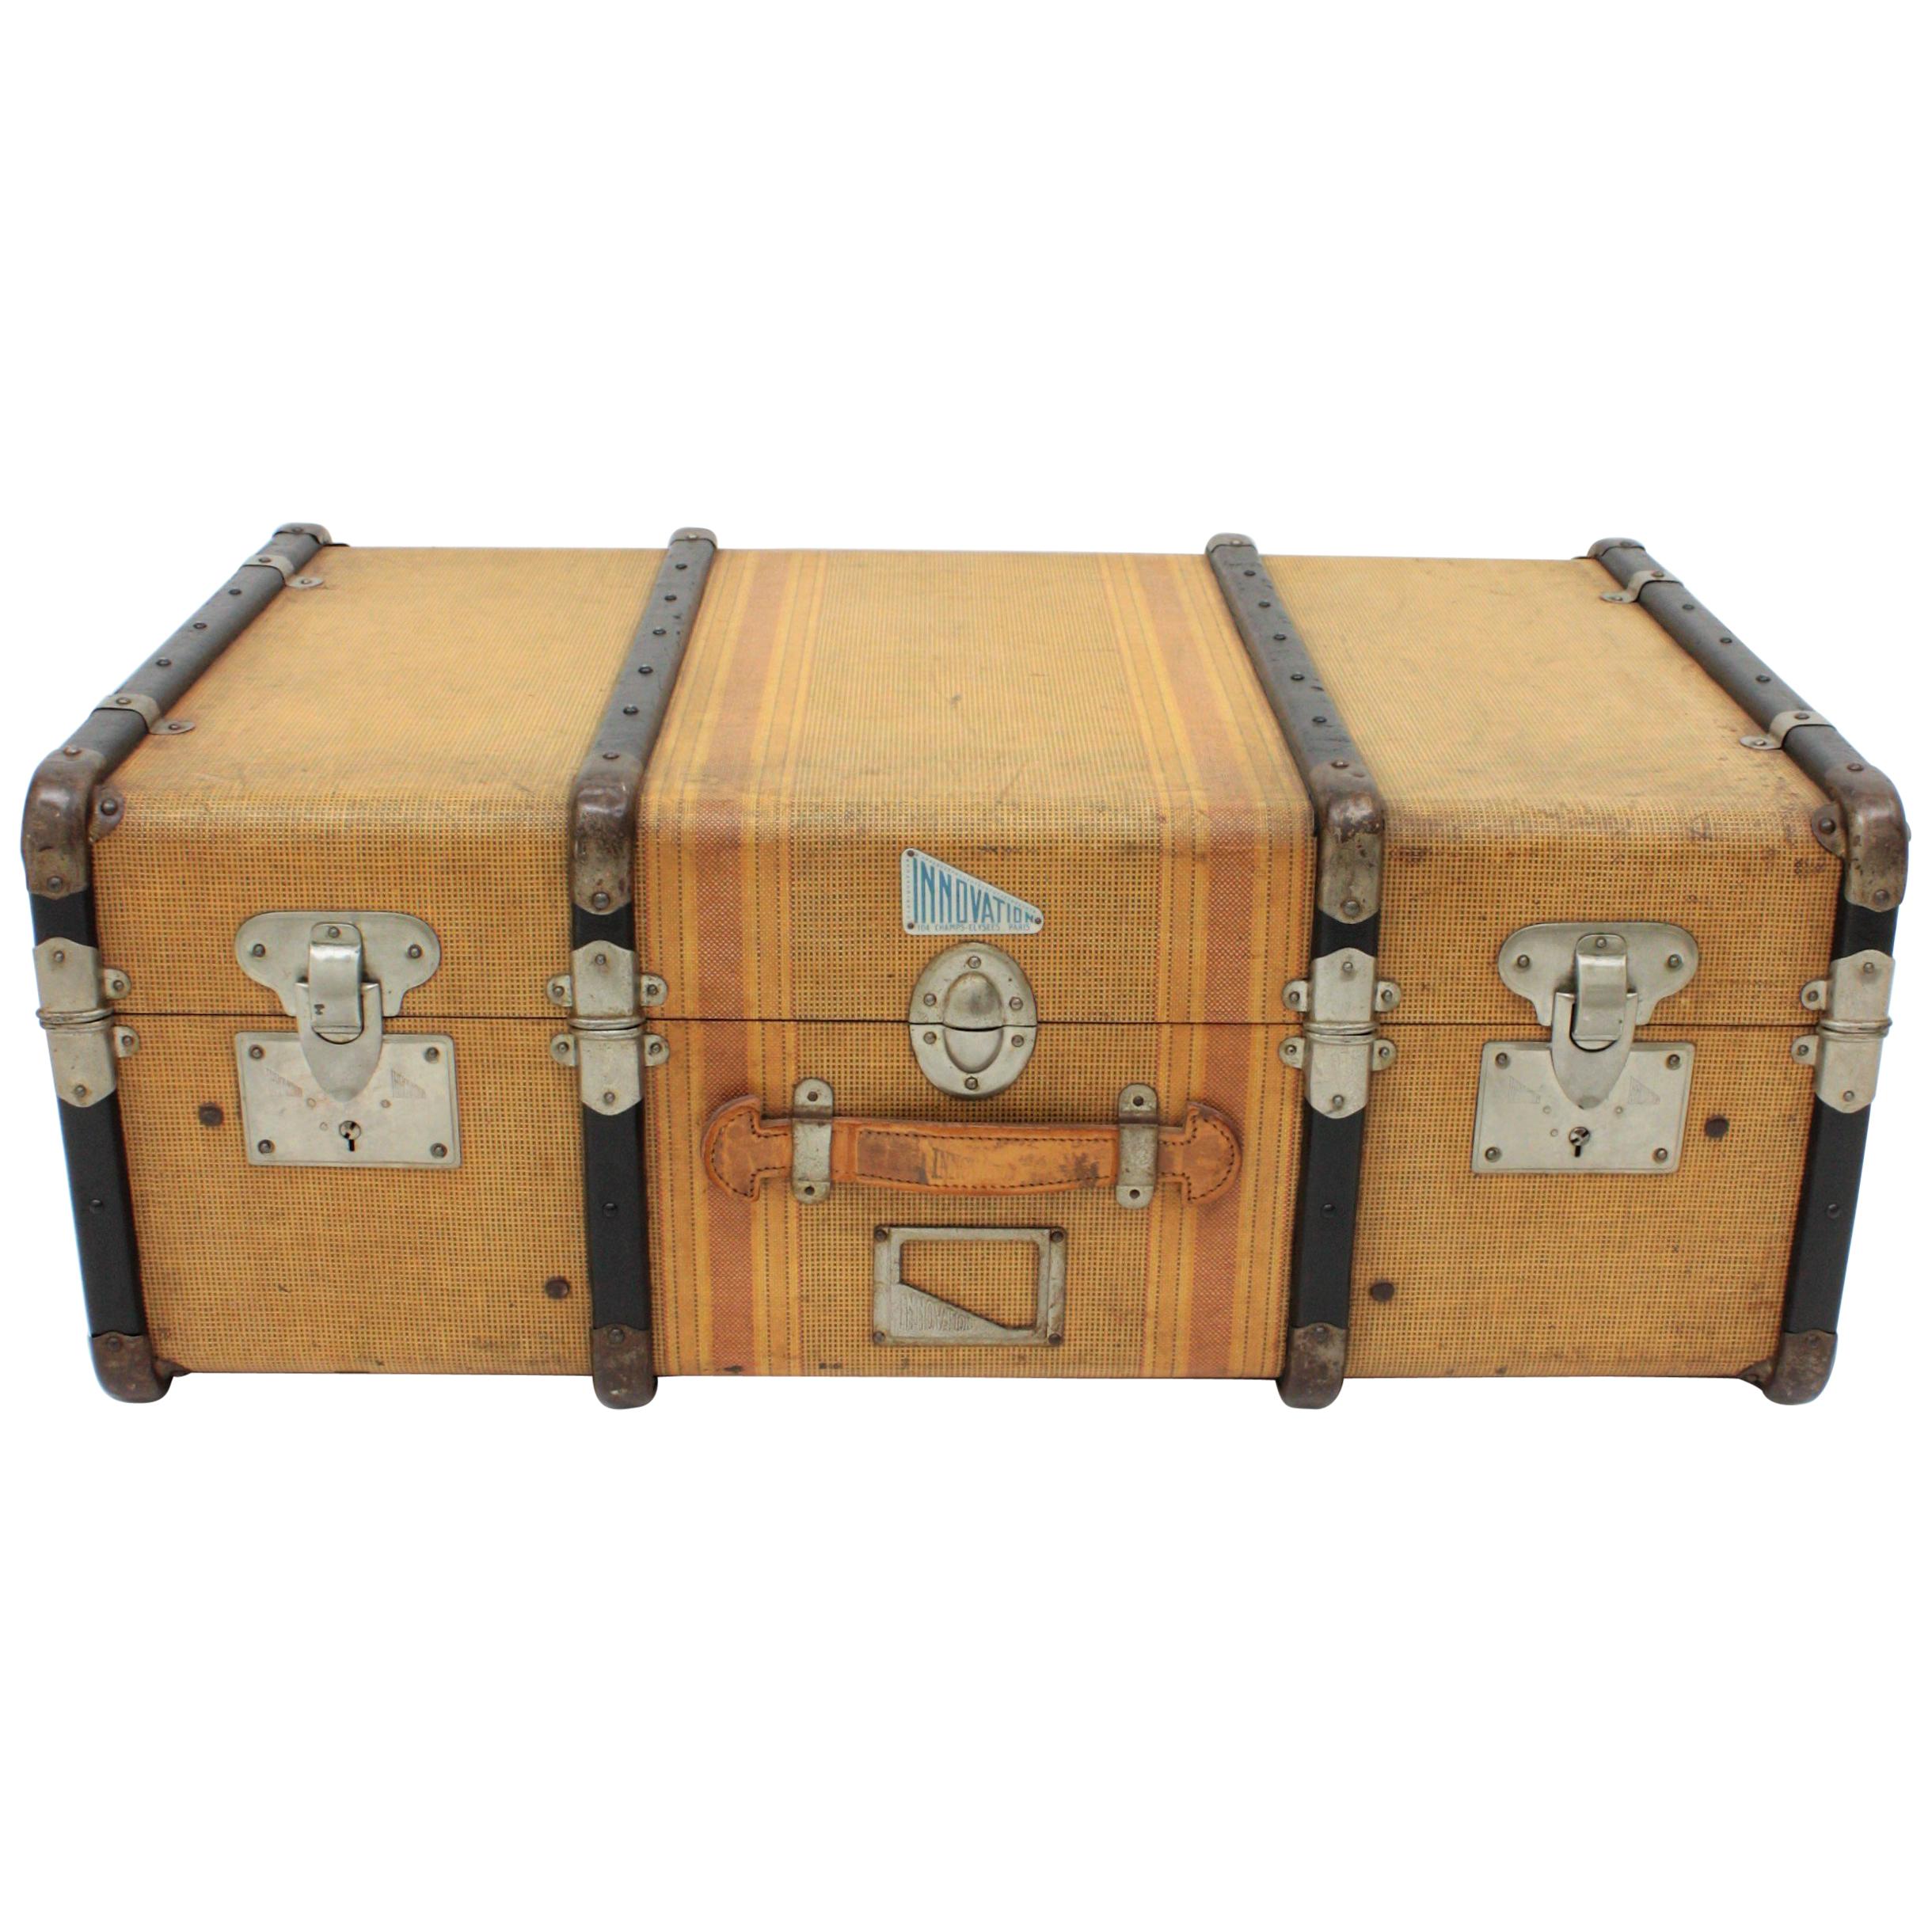 1940s cabin trunk manufactured by Innovation.
It is made all in wood and canvas, it has wooden black painted bars with metal protections and leather and iron fittings. The trademark is stamped on the handles and in the front part. The interior part